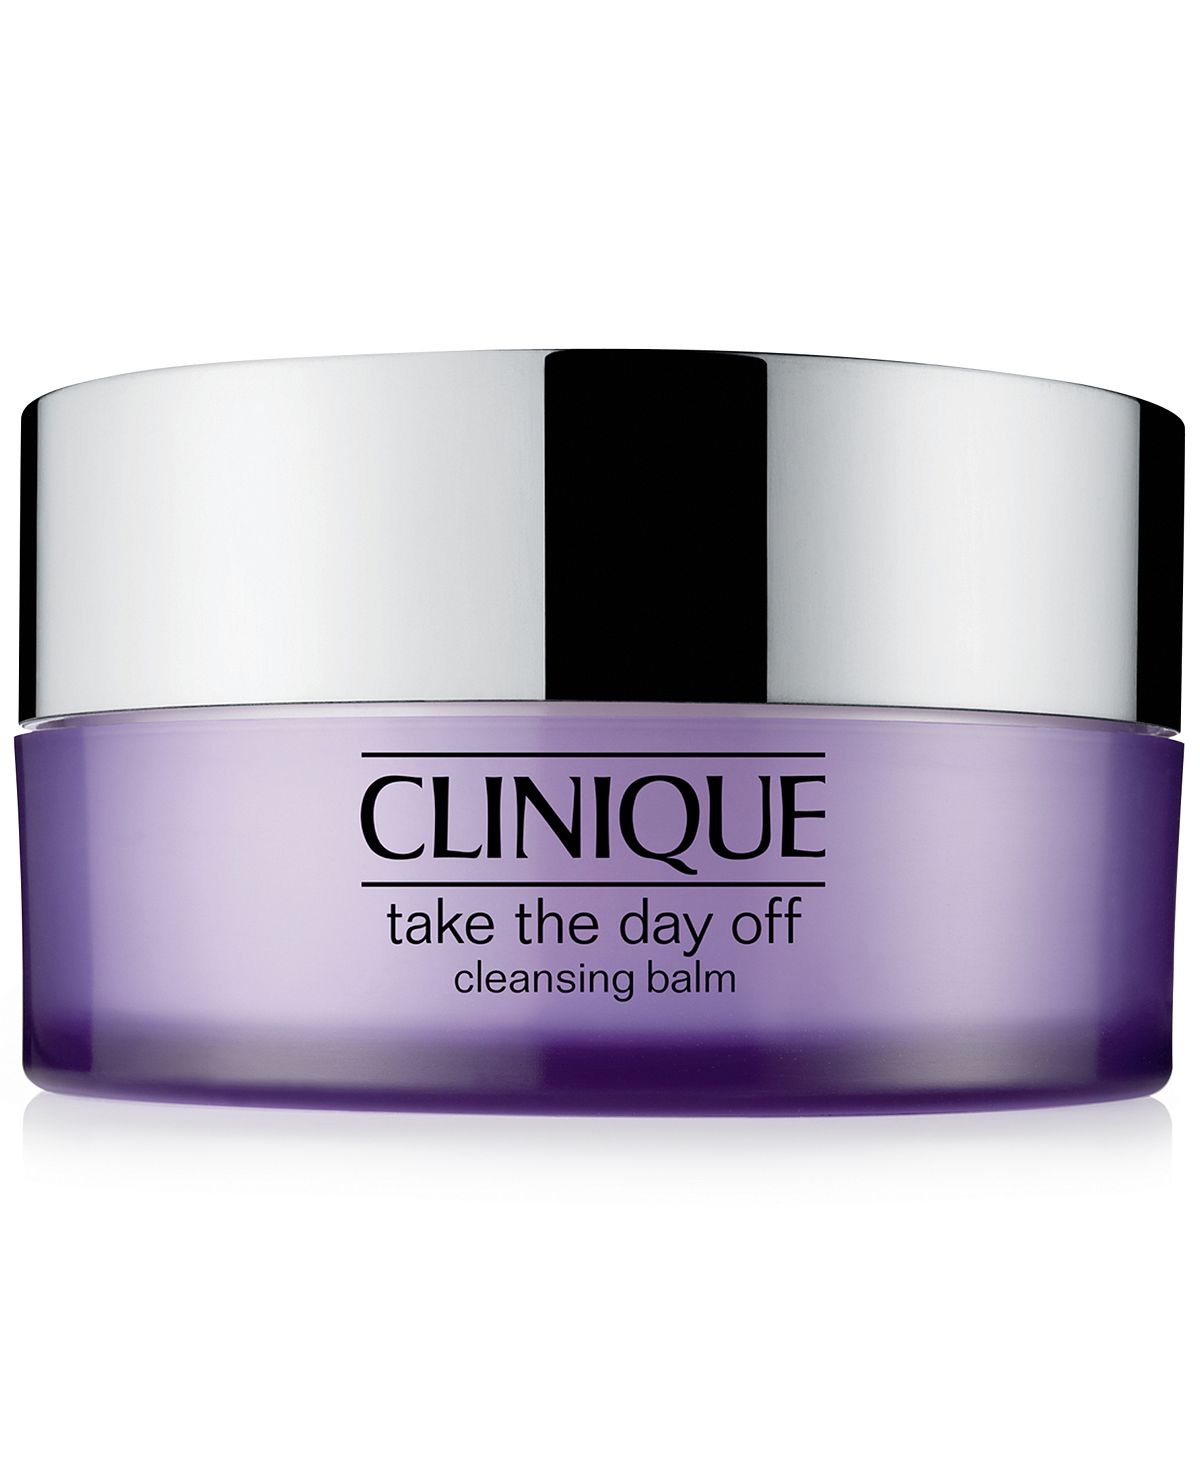 Clinique - Take The Day Off Cleansing Balm, 3.8 oz